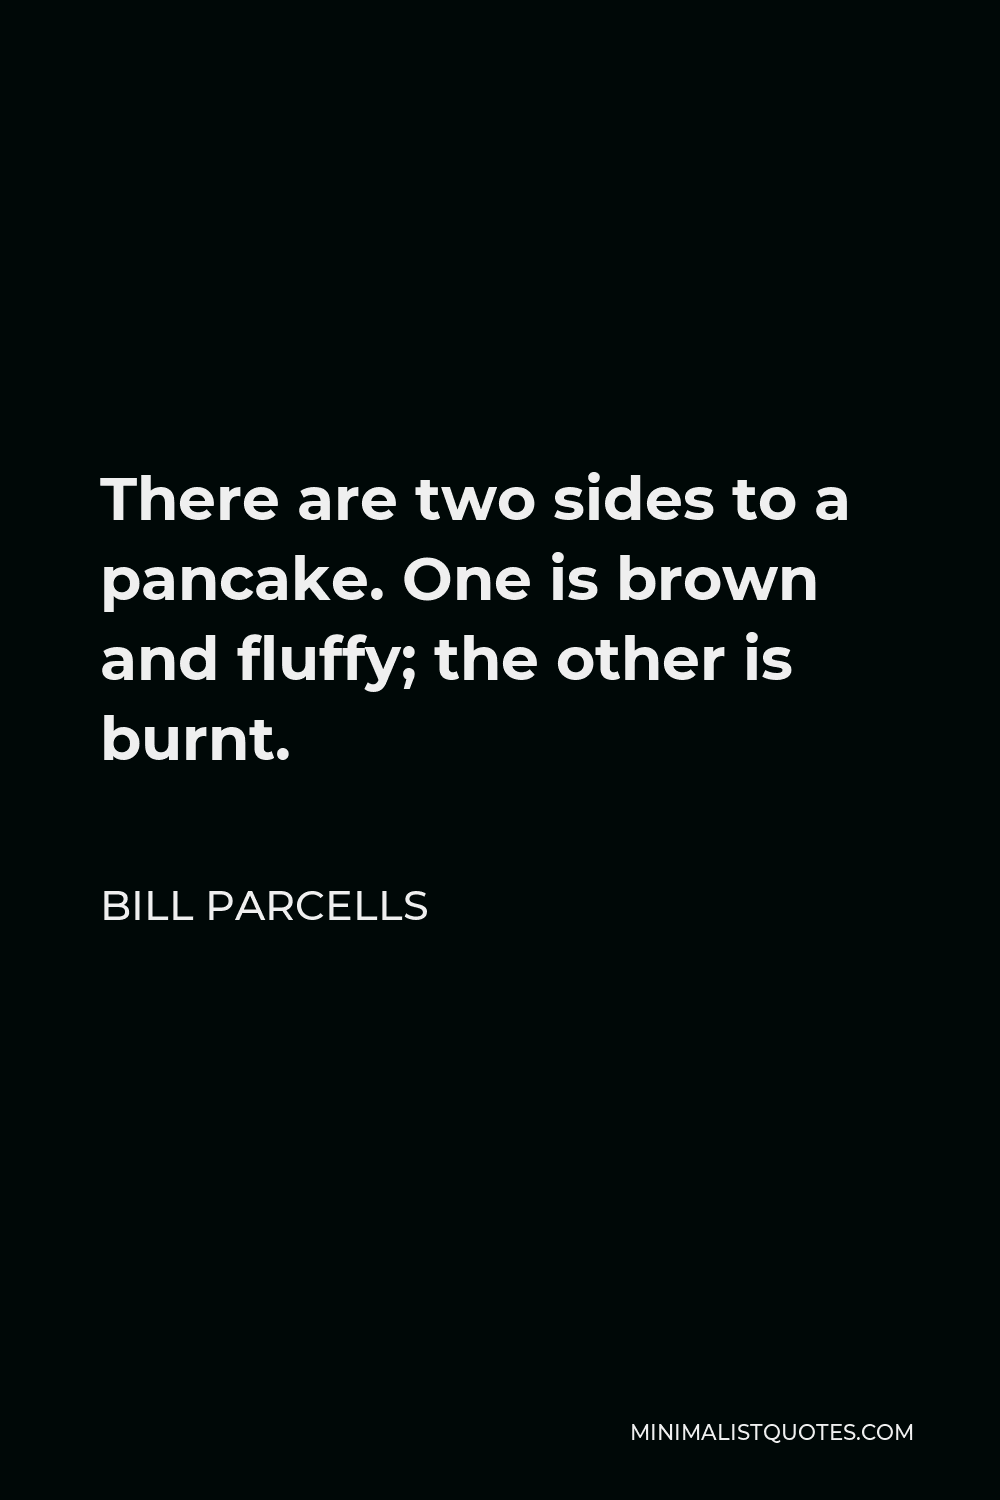 Bill Parcells Quote - There are two sides to a pancake. One is brown and fluffy; the other is burnt.